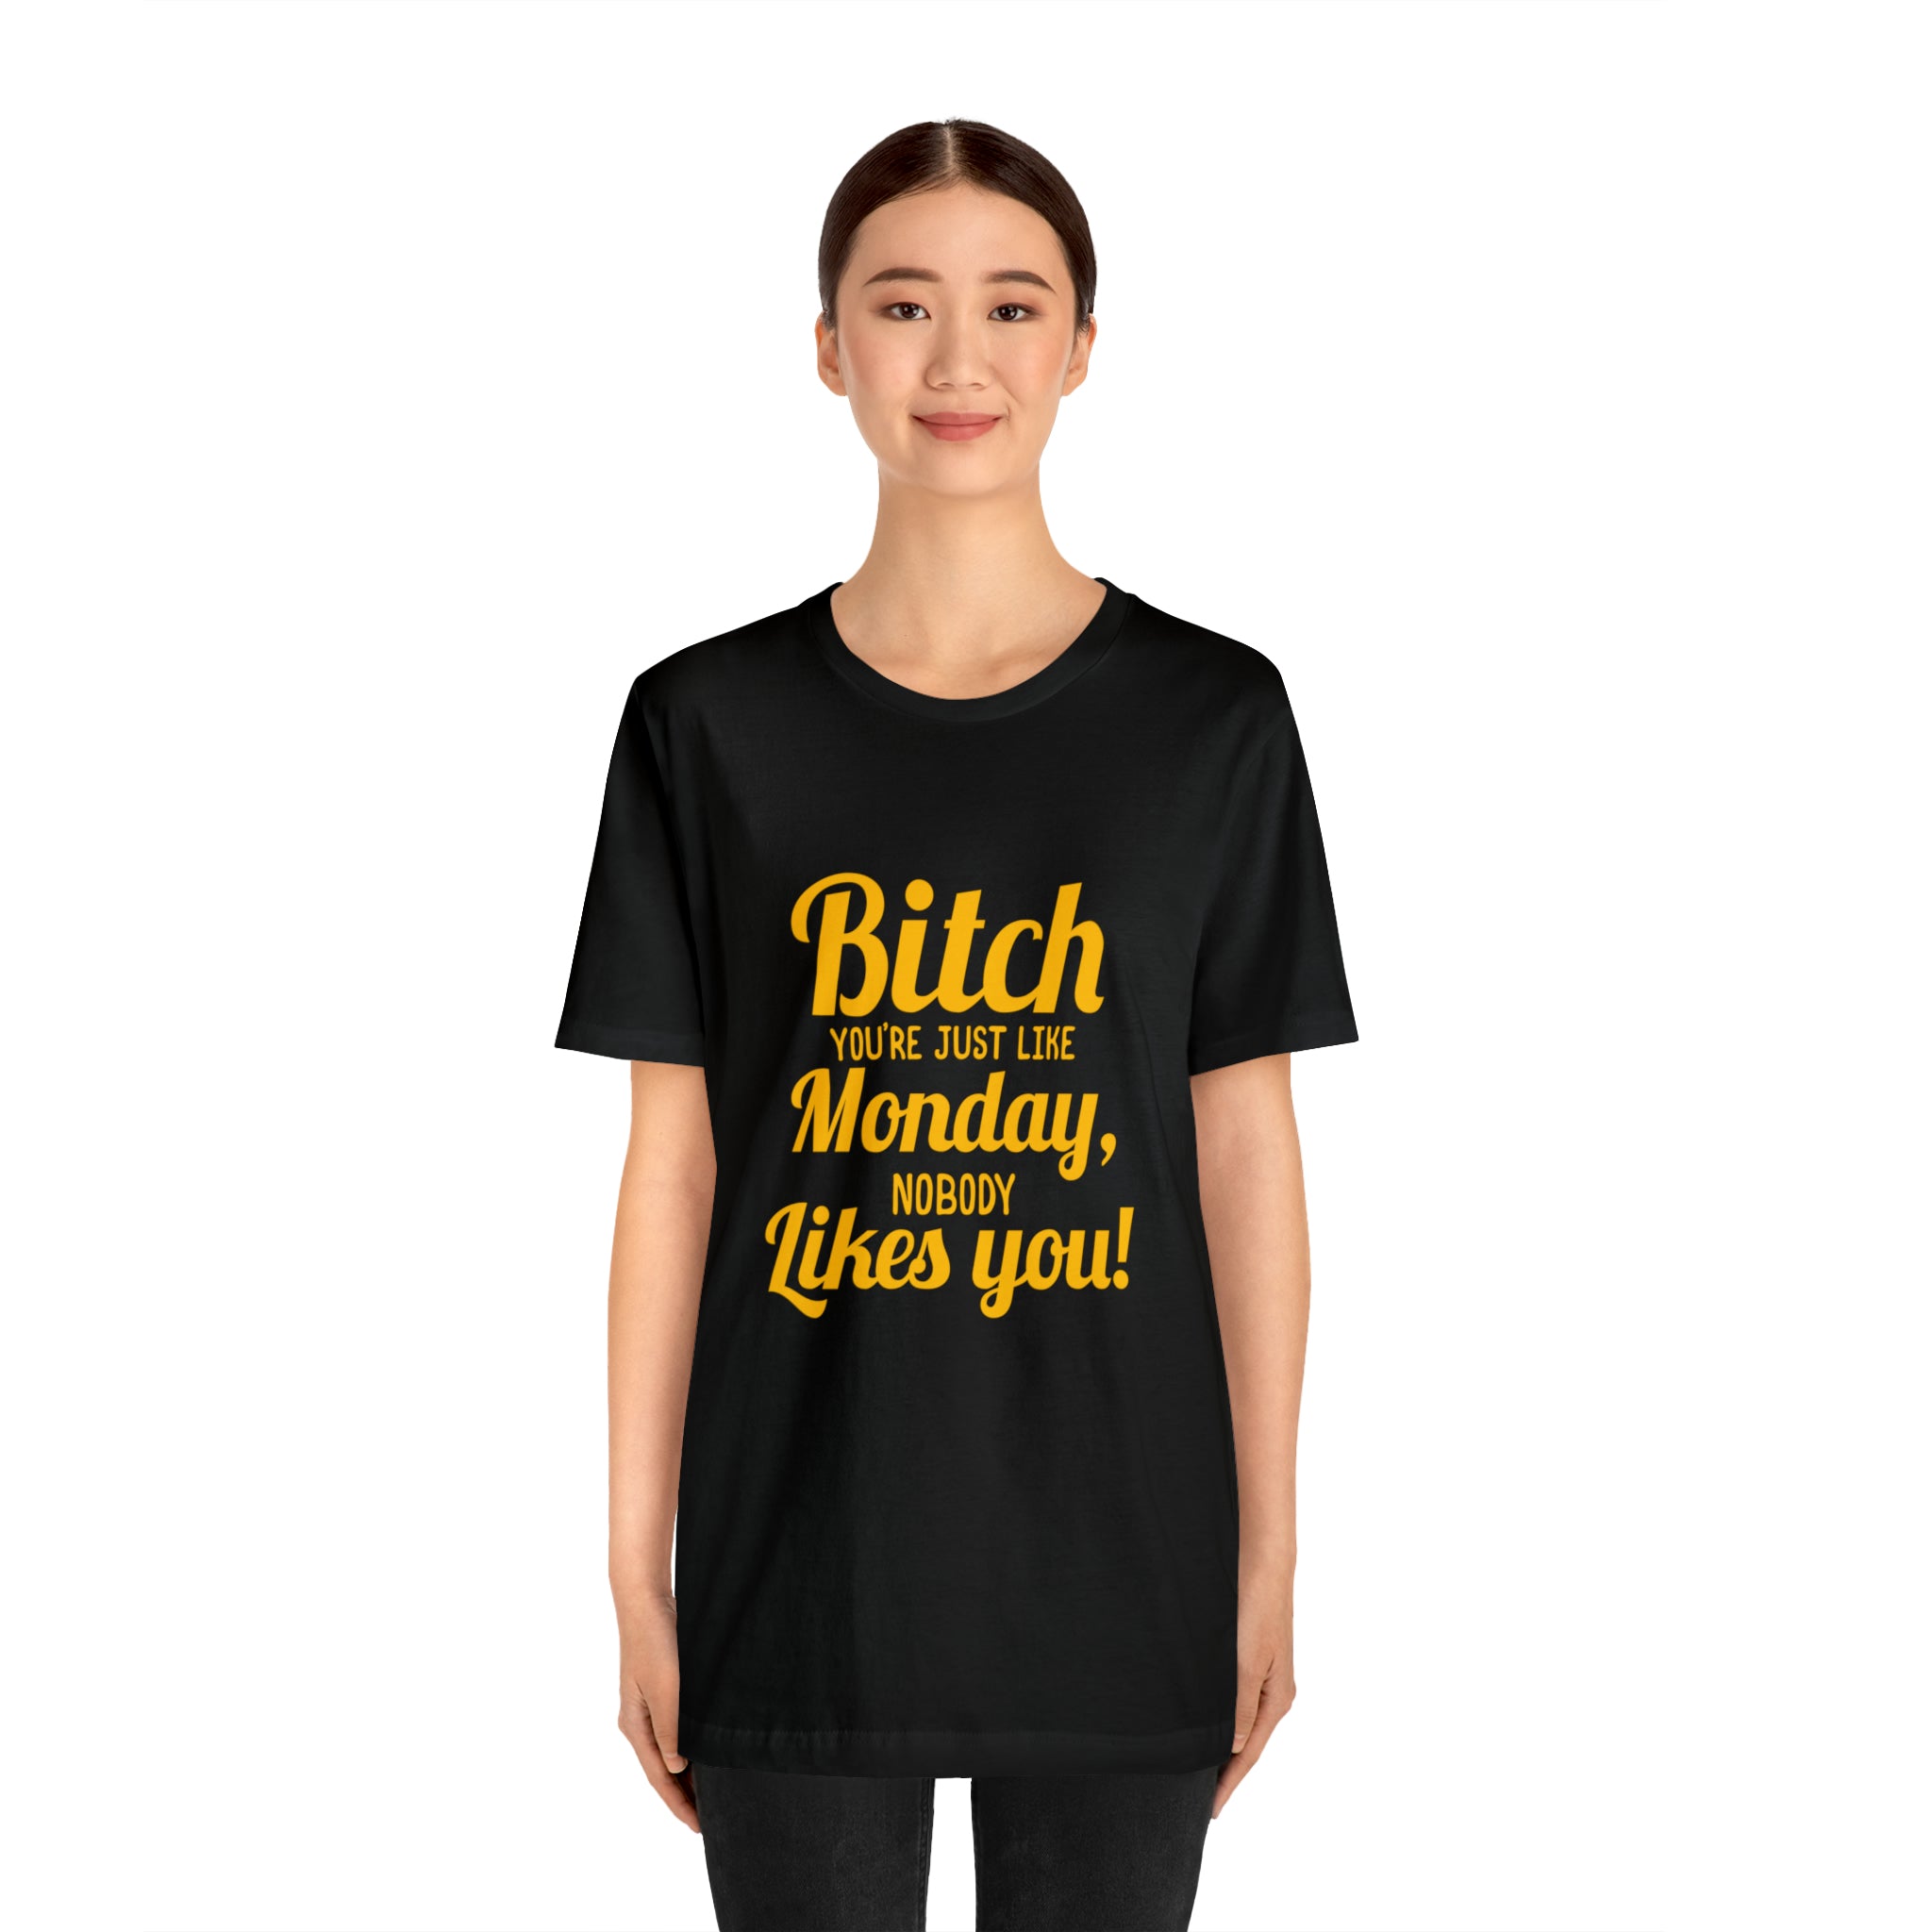 A woman wearing a stylish black t-shirt that says "Bitch you are just like Monday nobody likes you" T-Shirt